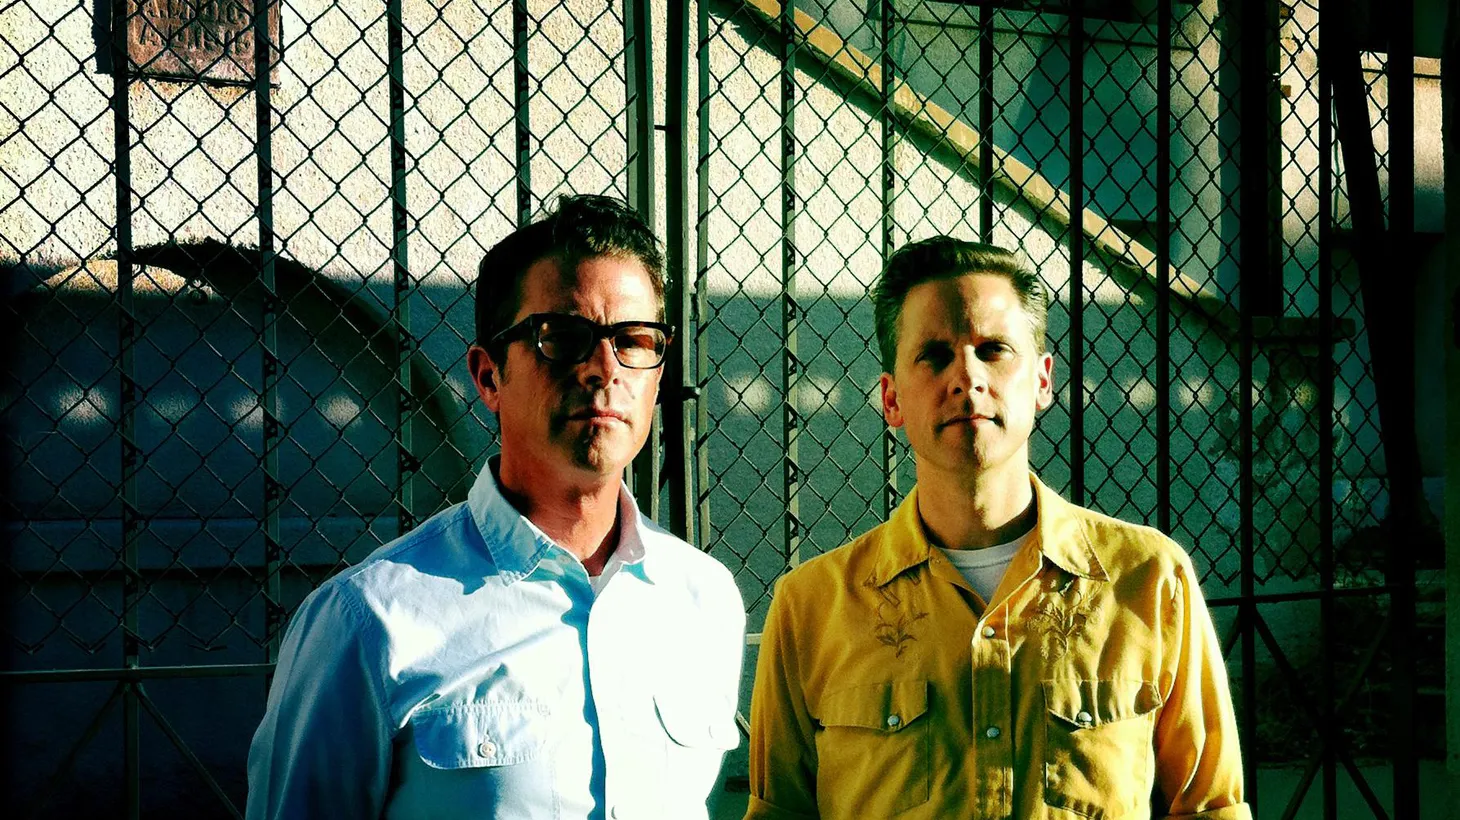 Calexico has always had a distinctive Southwestern influence to their music, but their latest album was inspired by a stint in New Orleans.